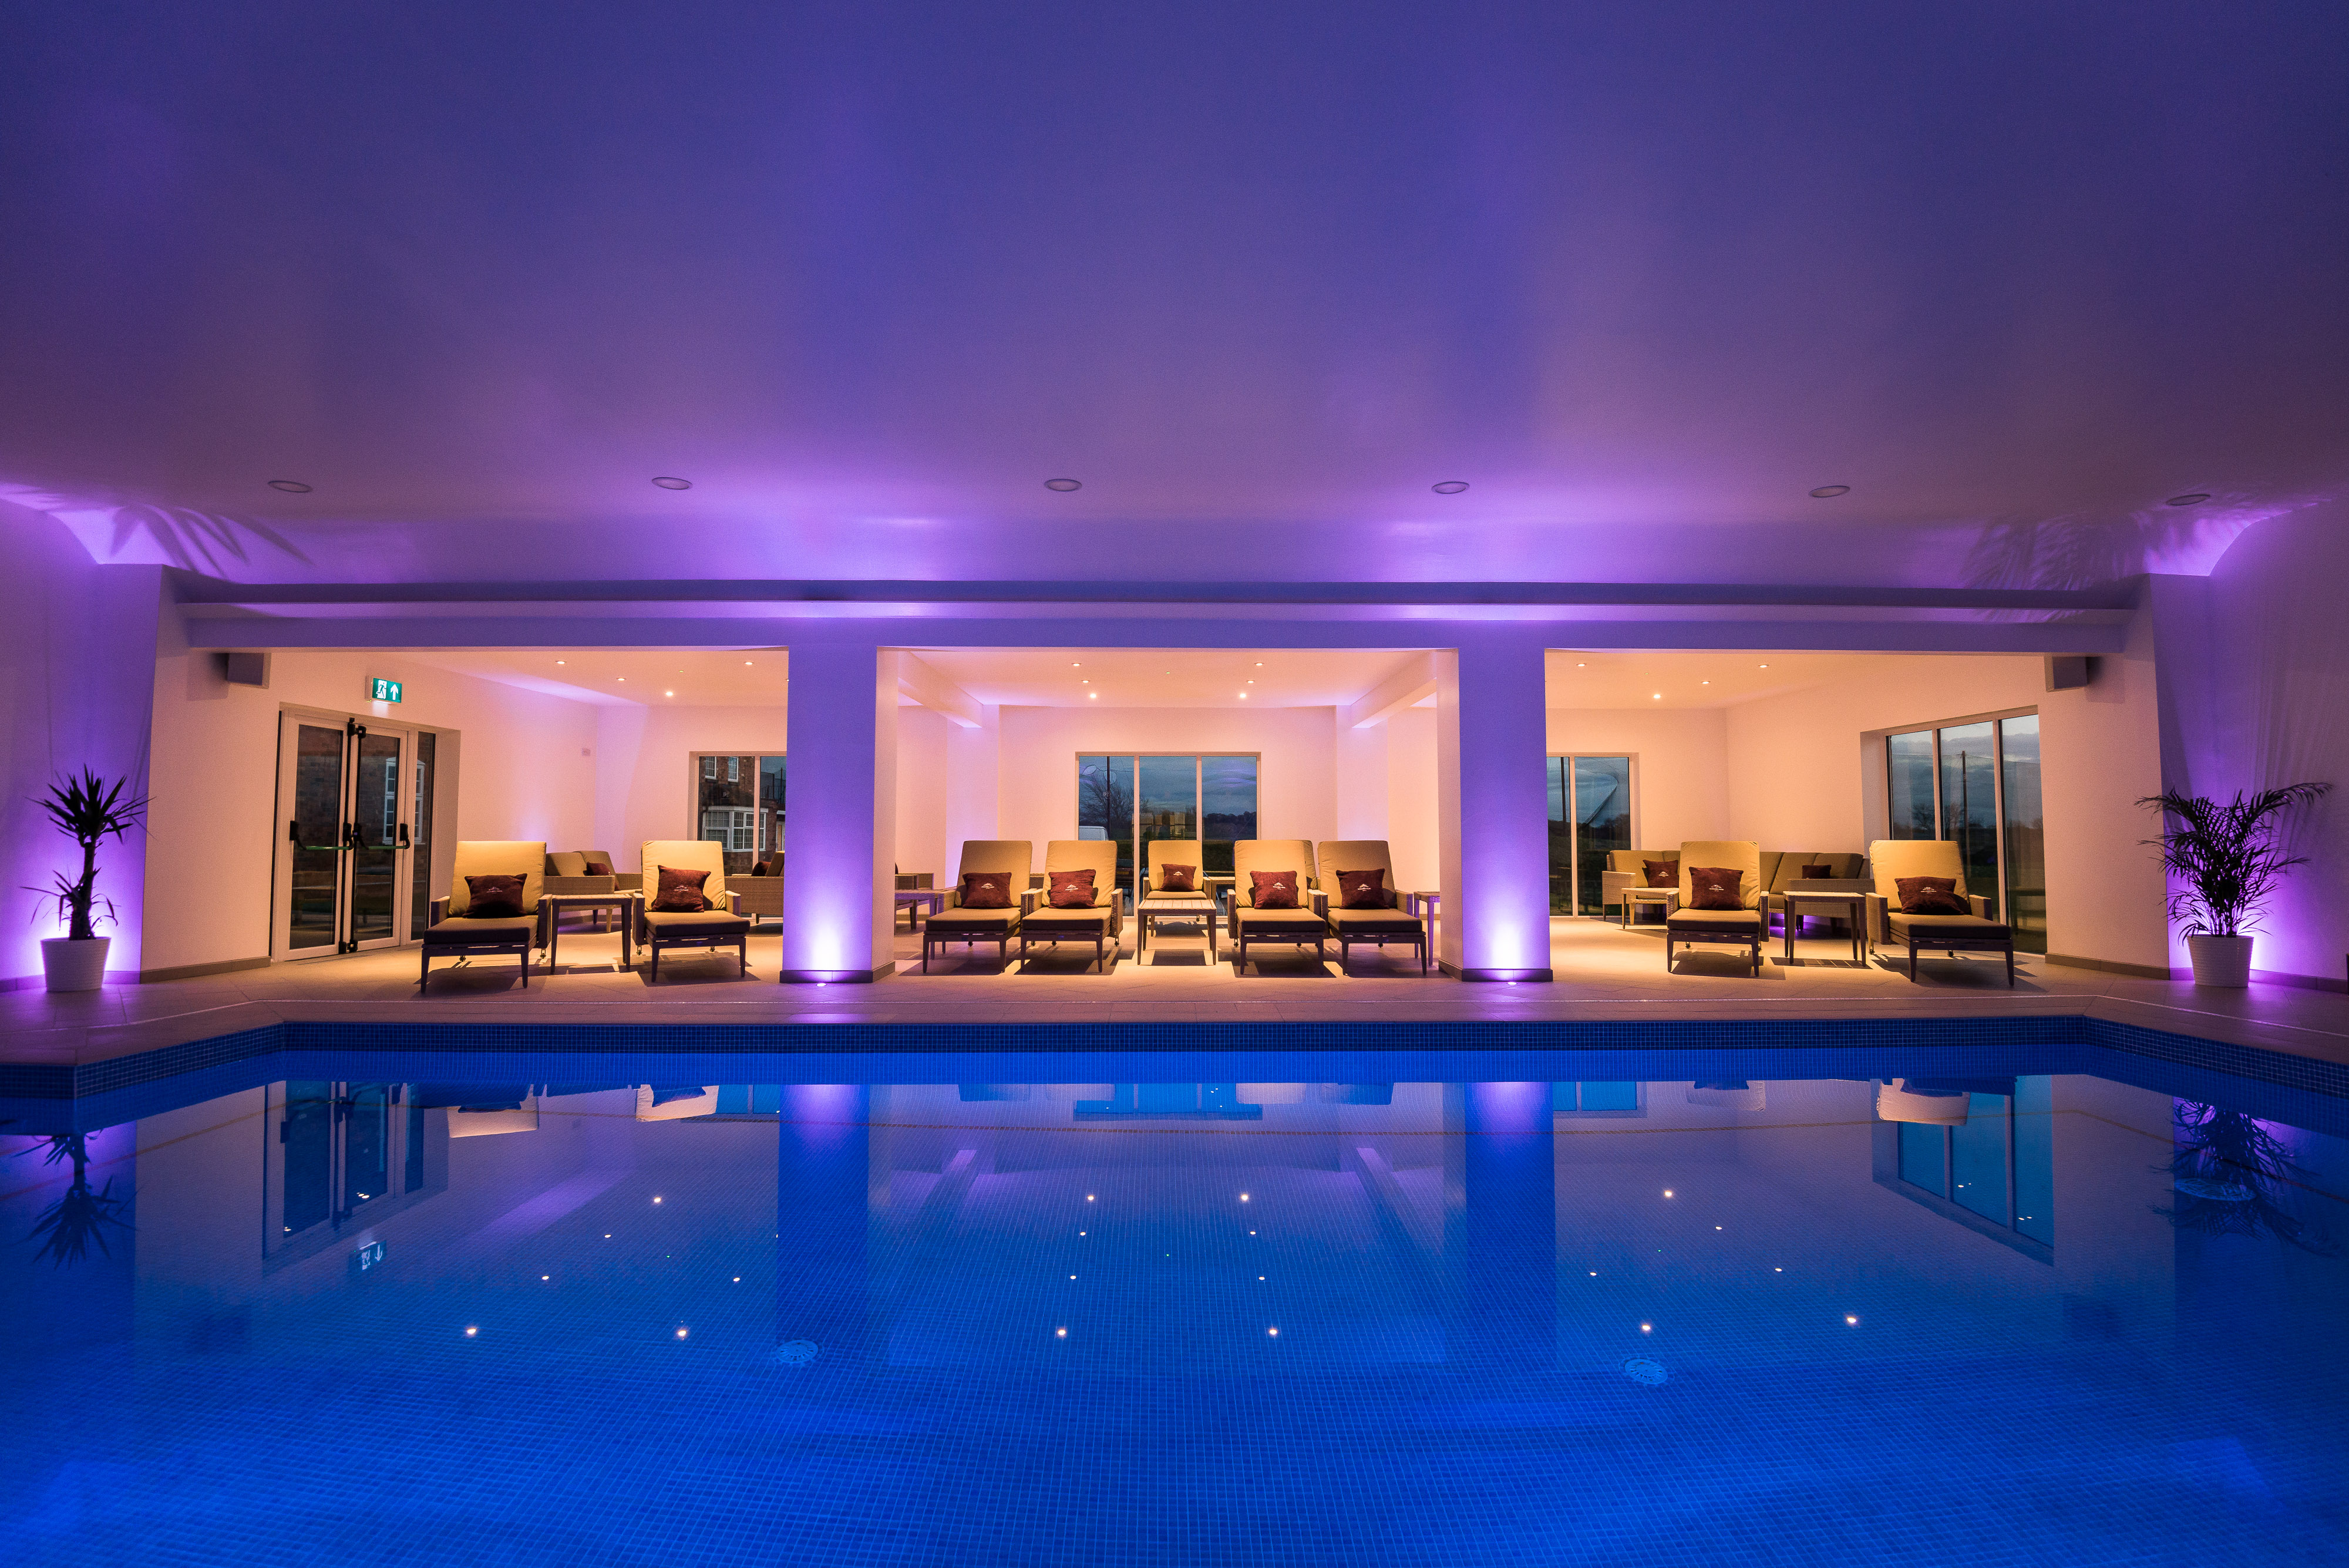 Malvern View Spa At Bank House Hotel Book Spa Breaks Days And Weekend Deals From £95